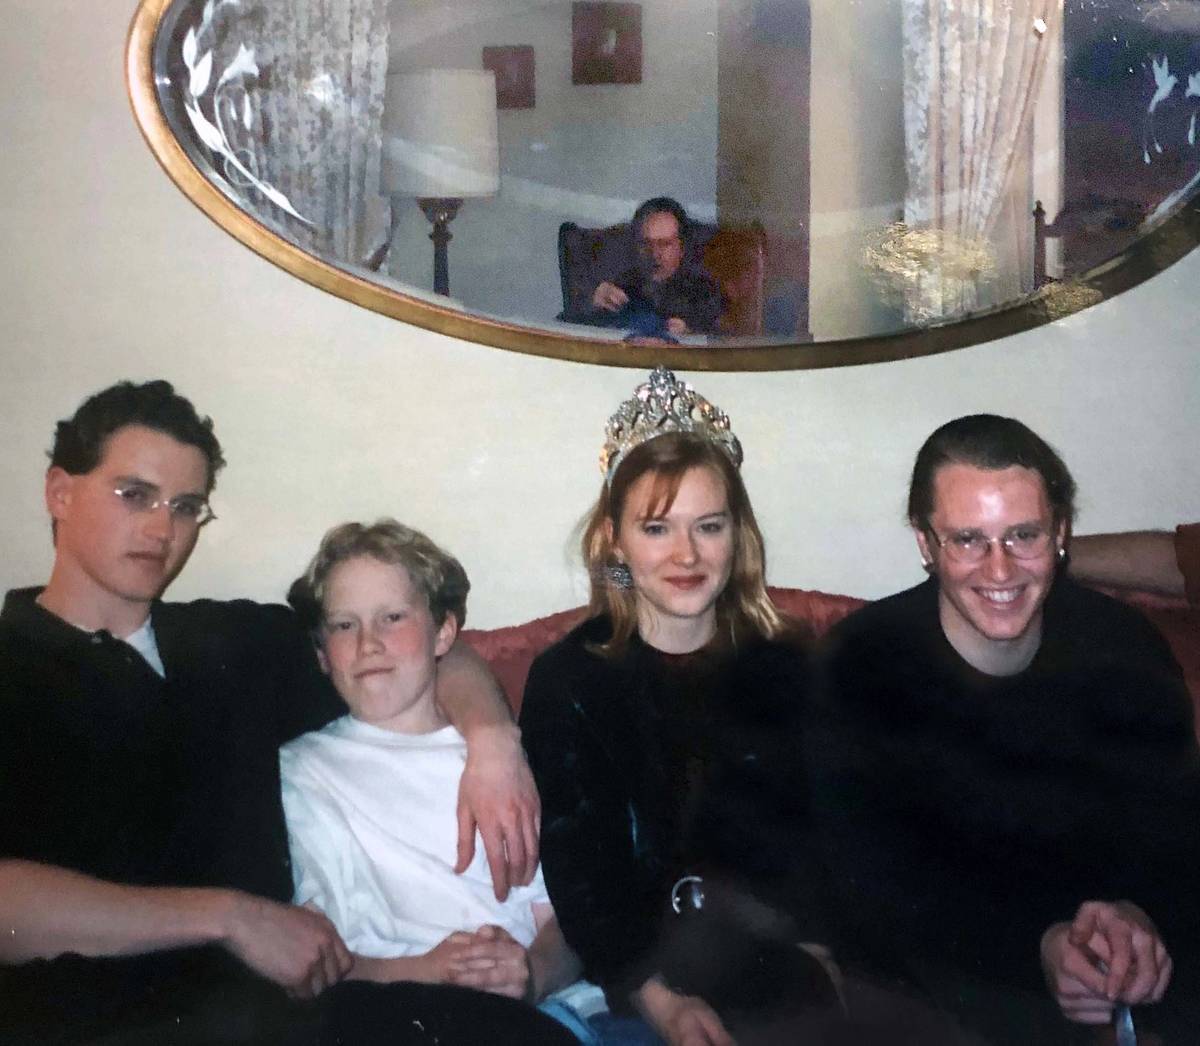 Duncan, age 19, and his three siblings, Creighton, Monica, and Dylan, at Monica’s 24th birthday party